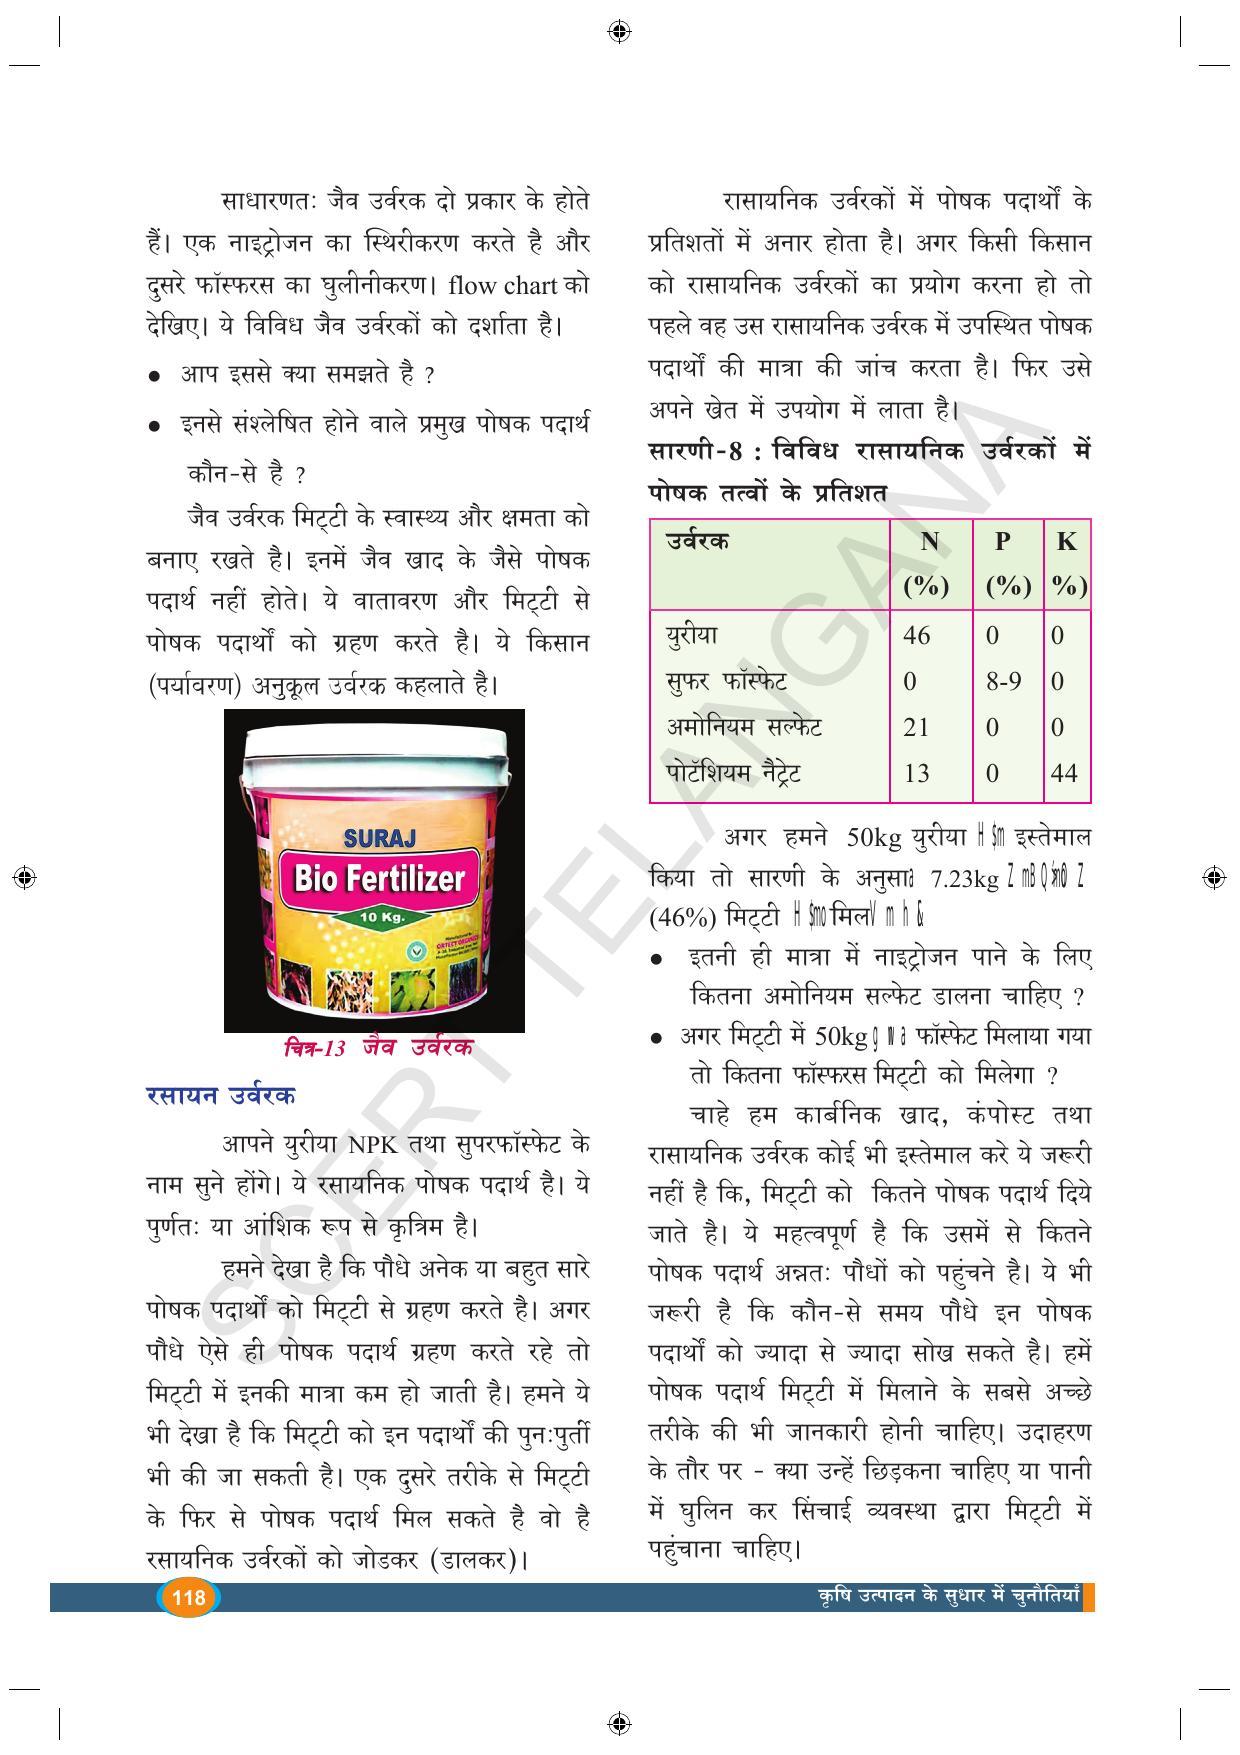 TS SCERT Class 9 Biological Science (Hindi Medium) Text Book - Page 130